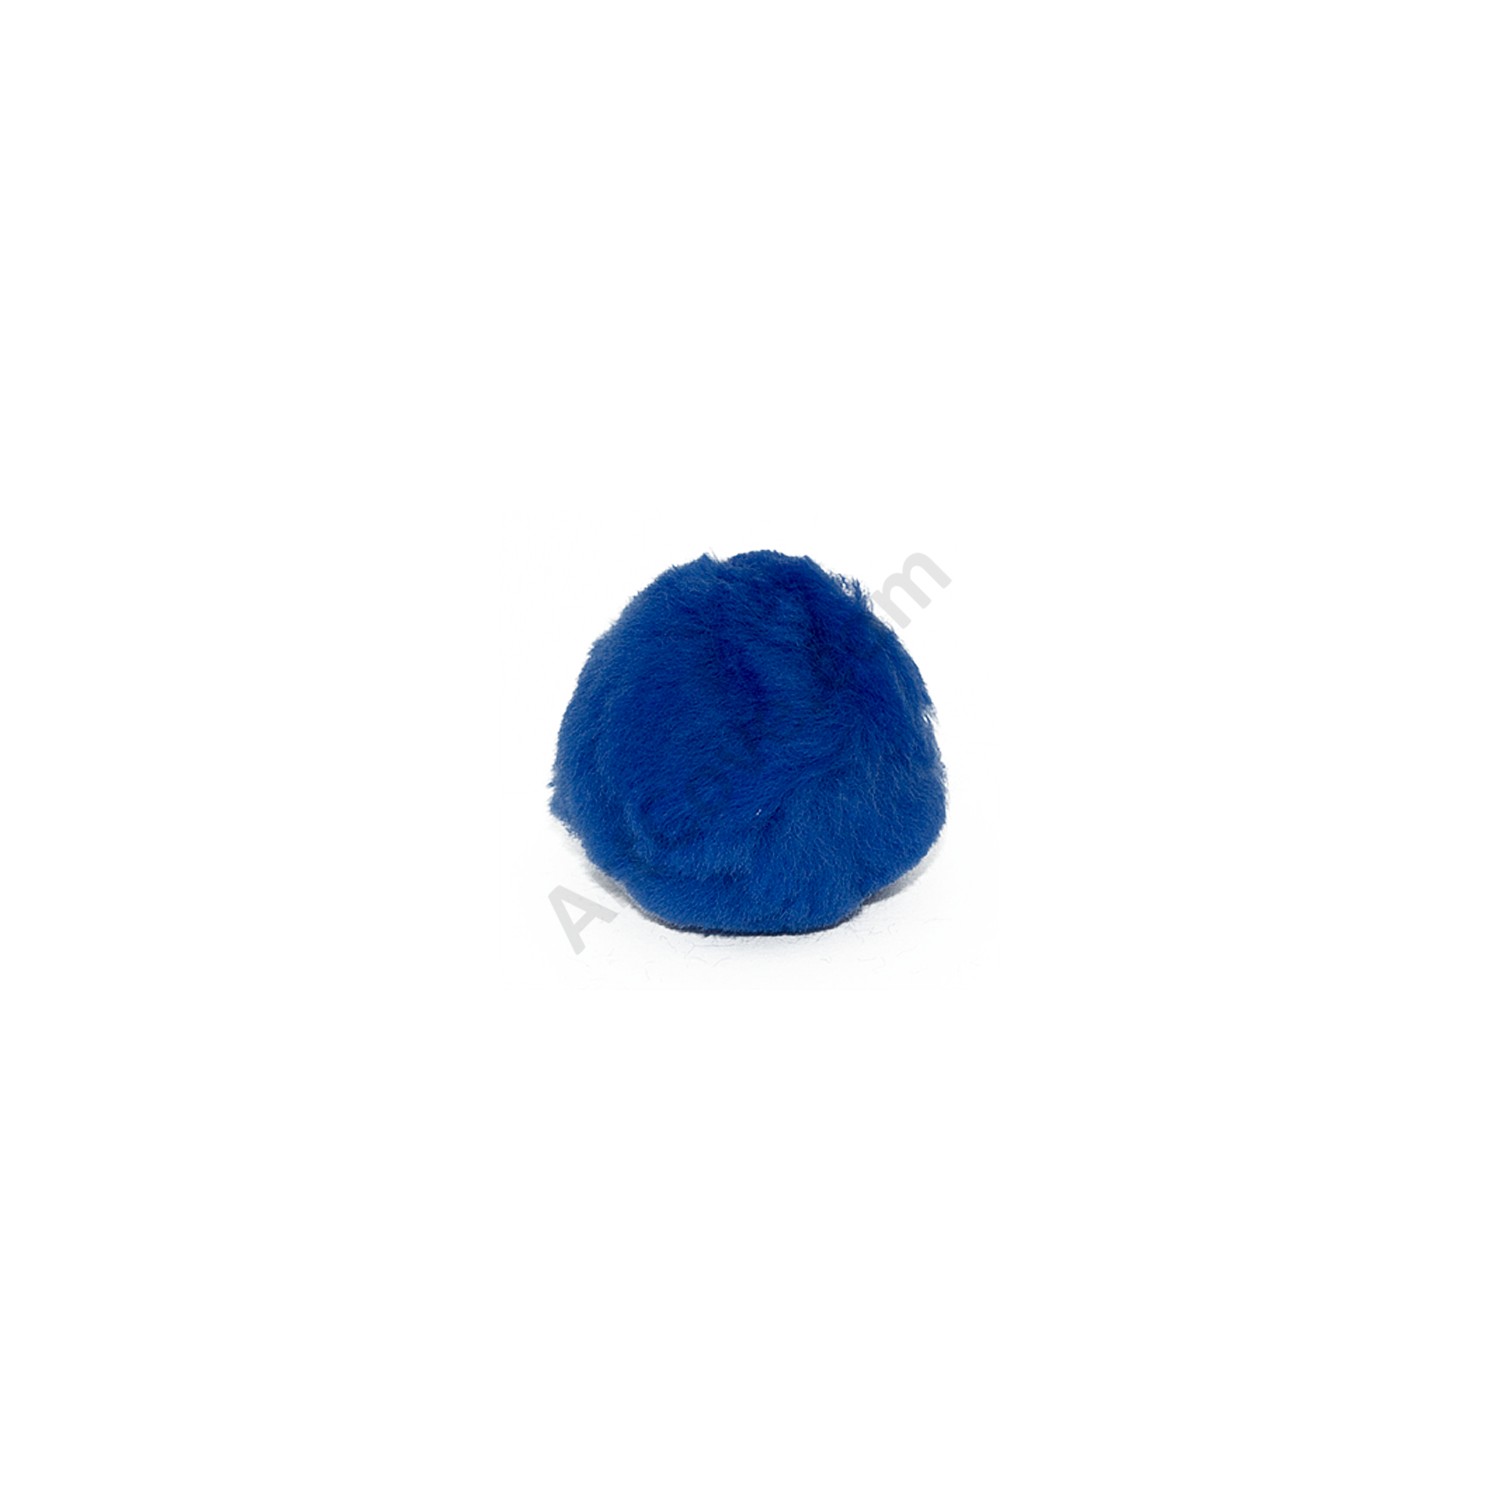 Pom Poms, Solid Color, 1.0-inch (25-mm), 50-pc, Turquoise Blue